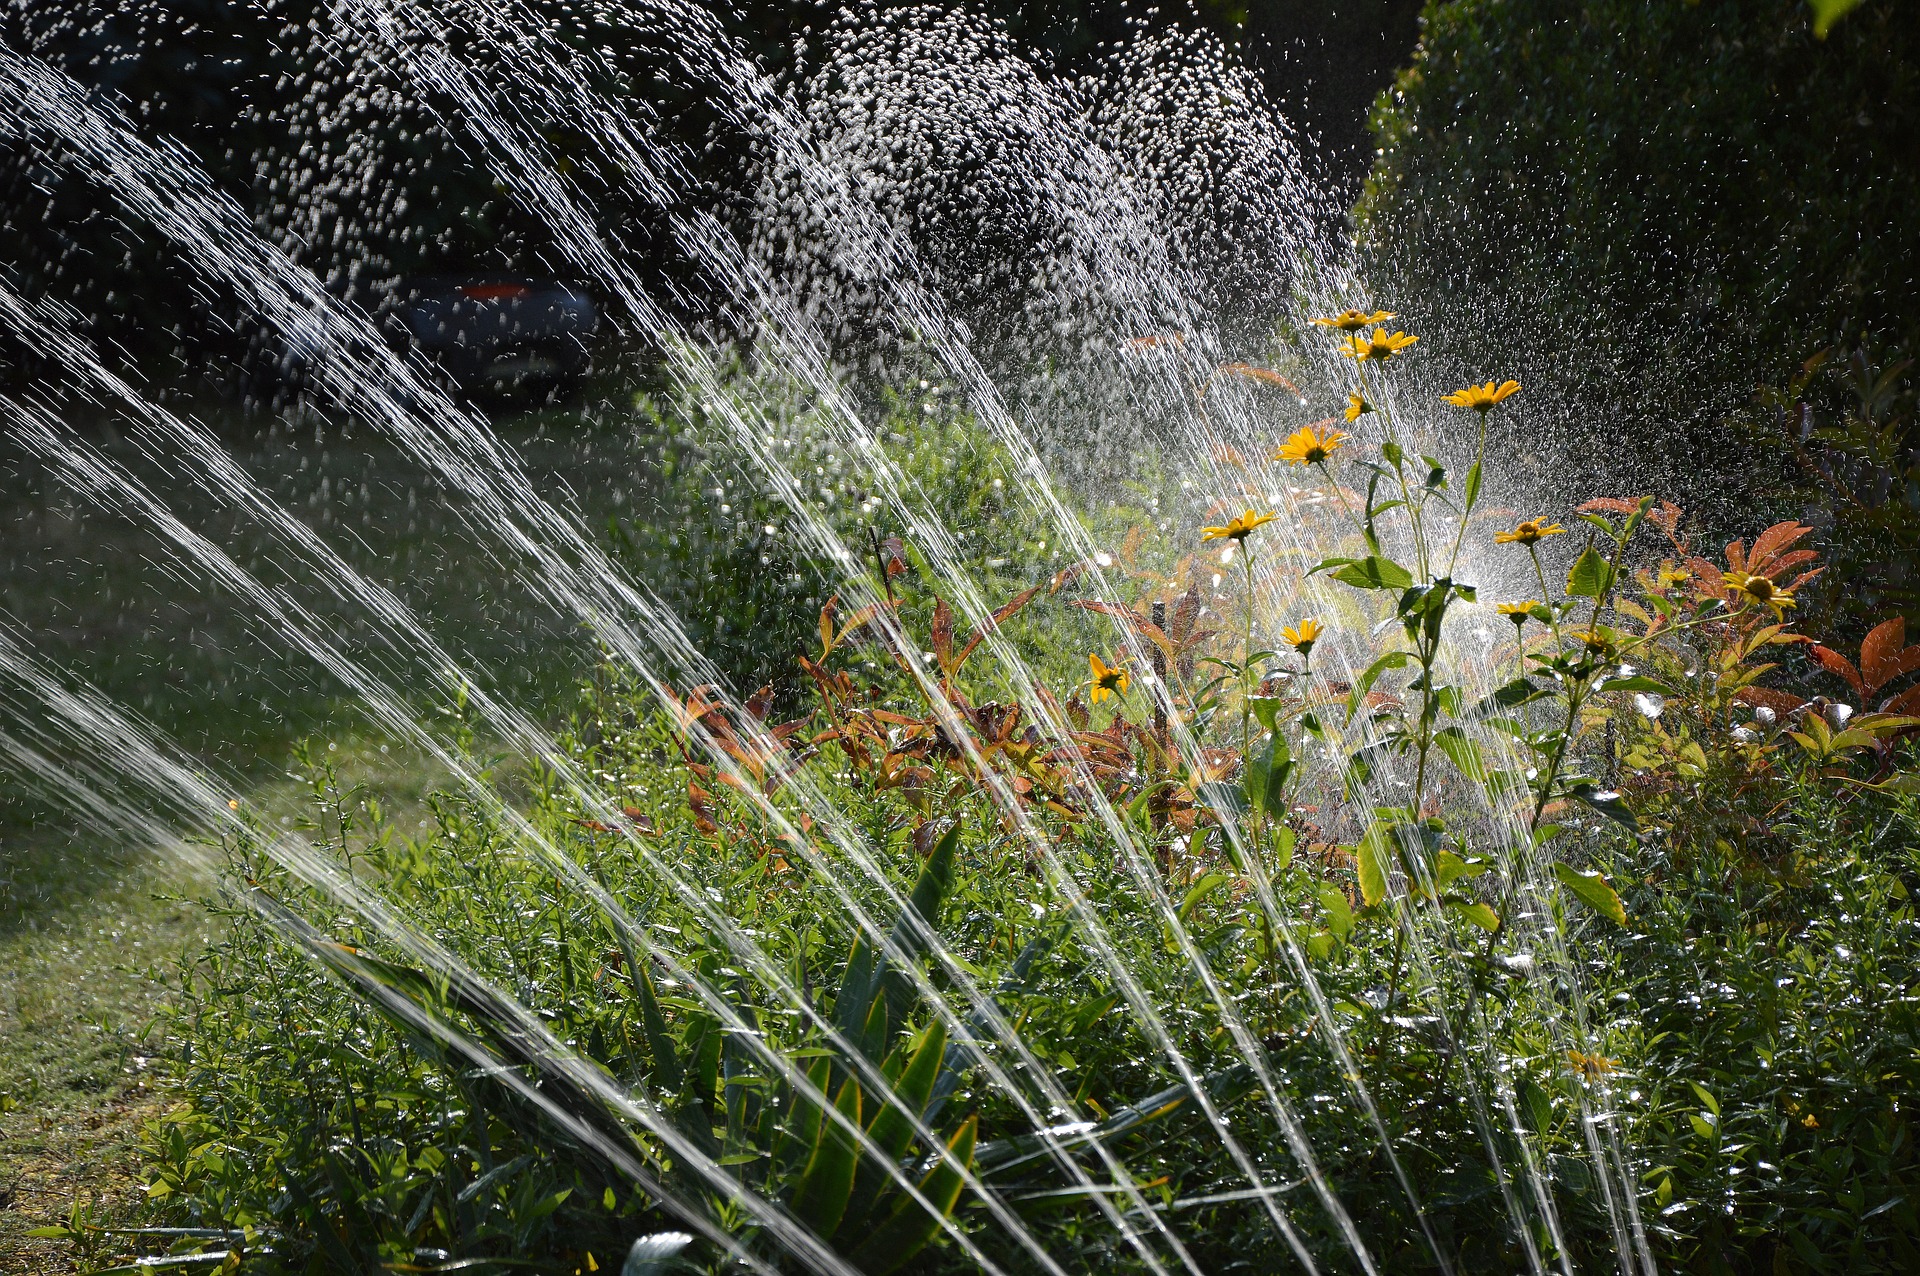 A flower garden with a sprinkler system spraying up over the plants in multiple streams